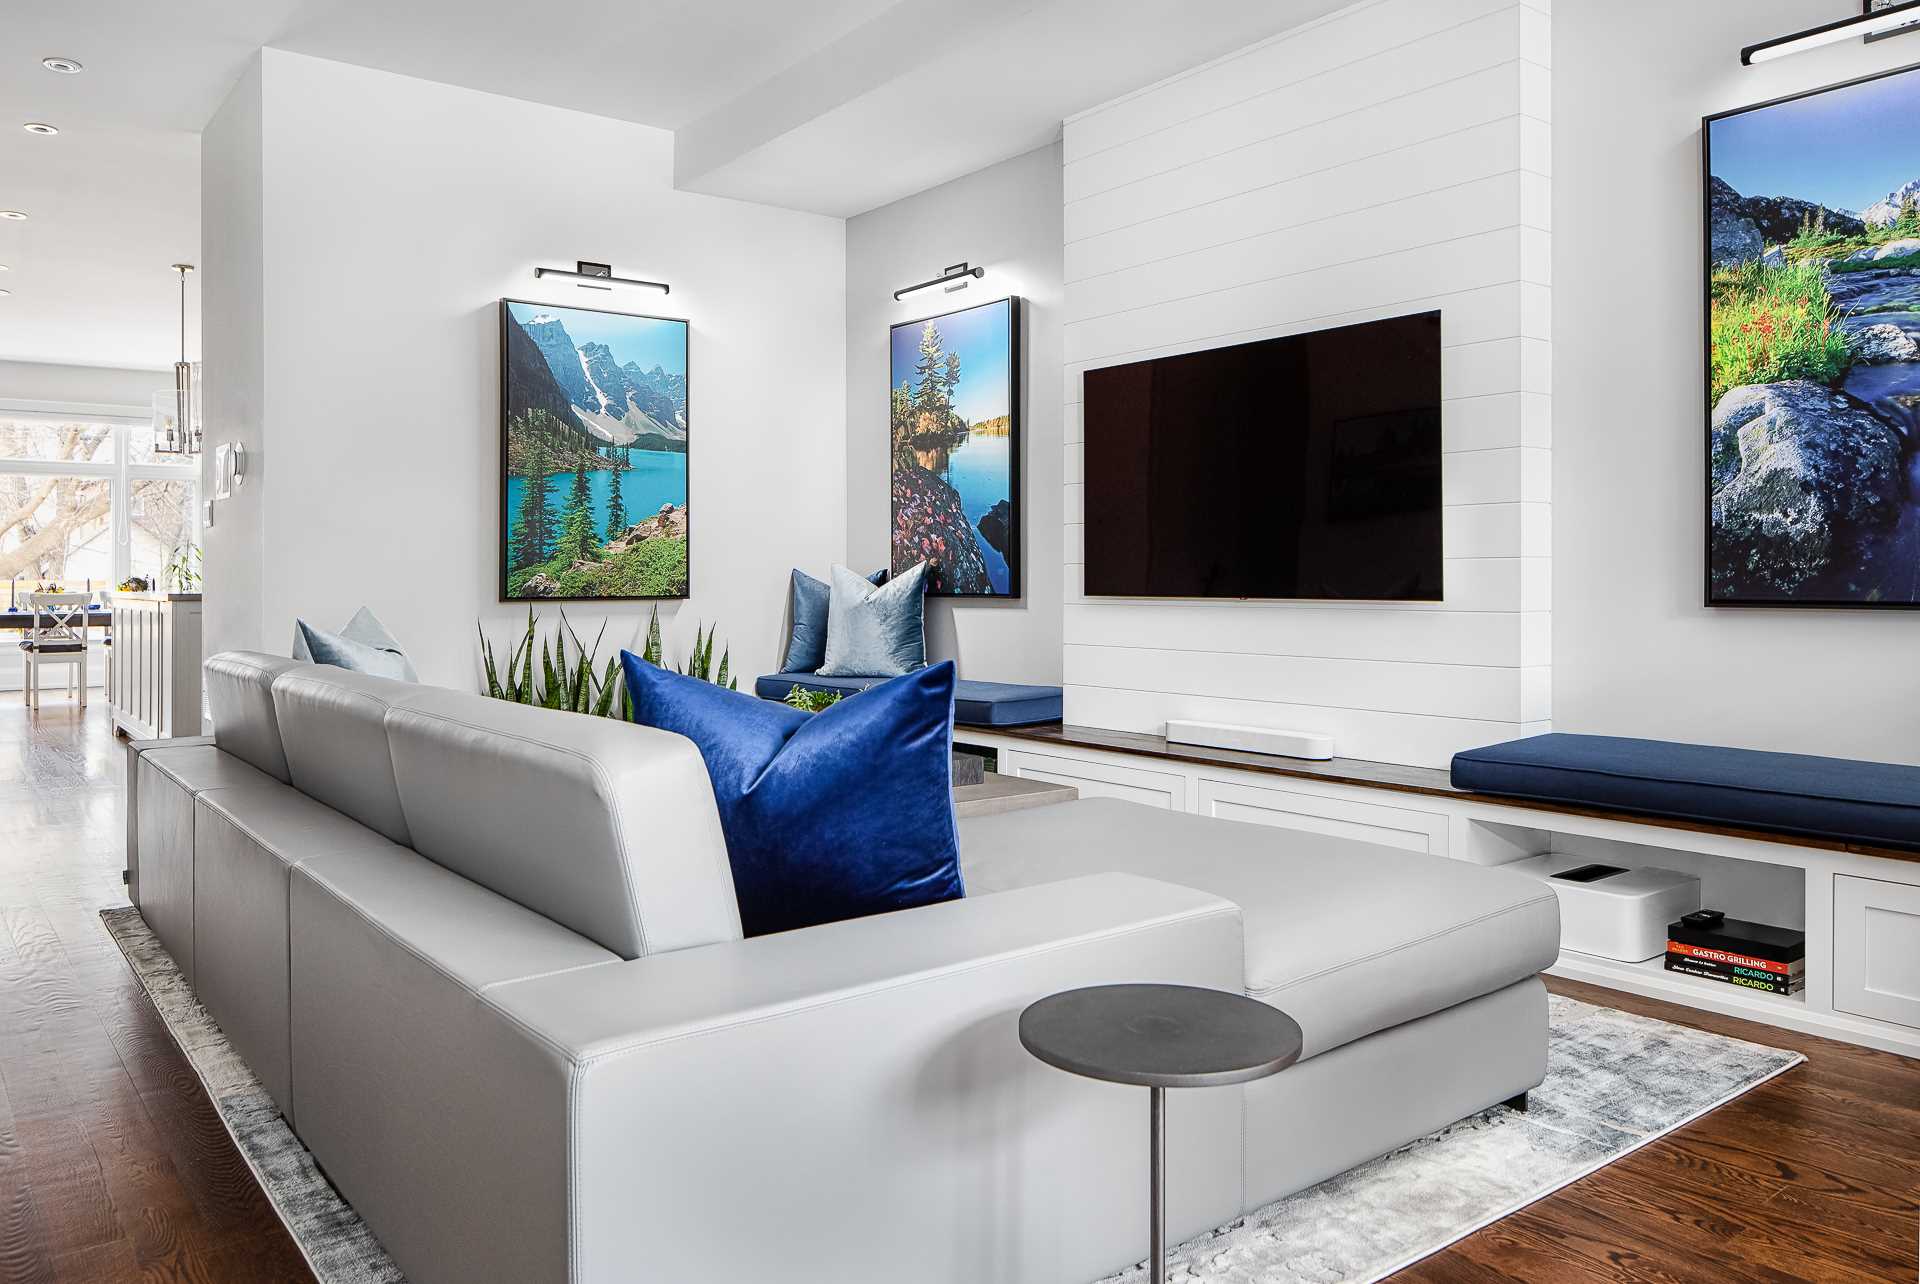 In this modern living room, a low modern sectional was included to comfortably seat the client’s family of three during movie nights. Custom-designed benches were designed opposite a coffee table increasing the seating options and storage, allowing the space to be used practically when guests visit.